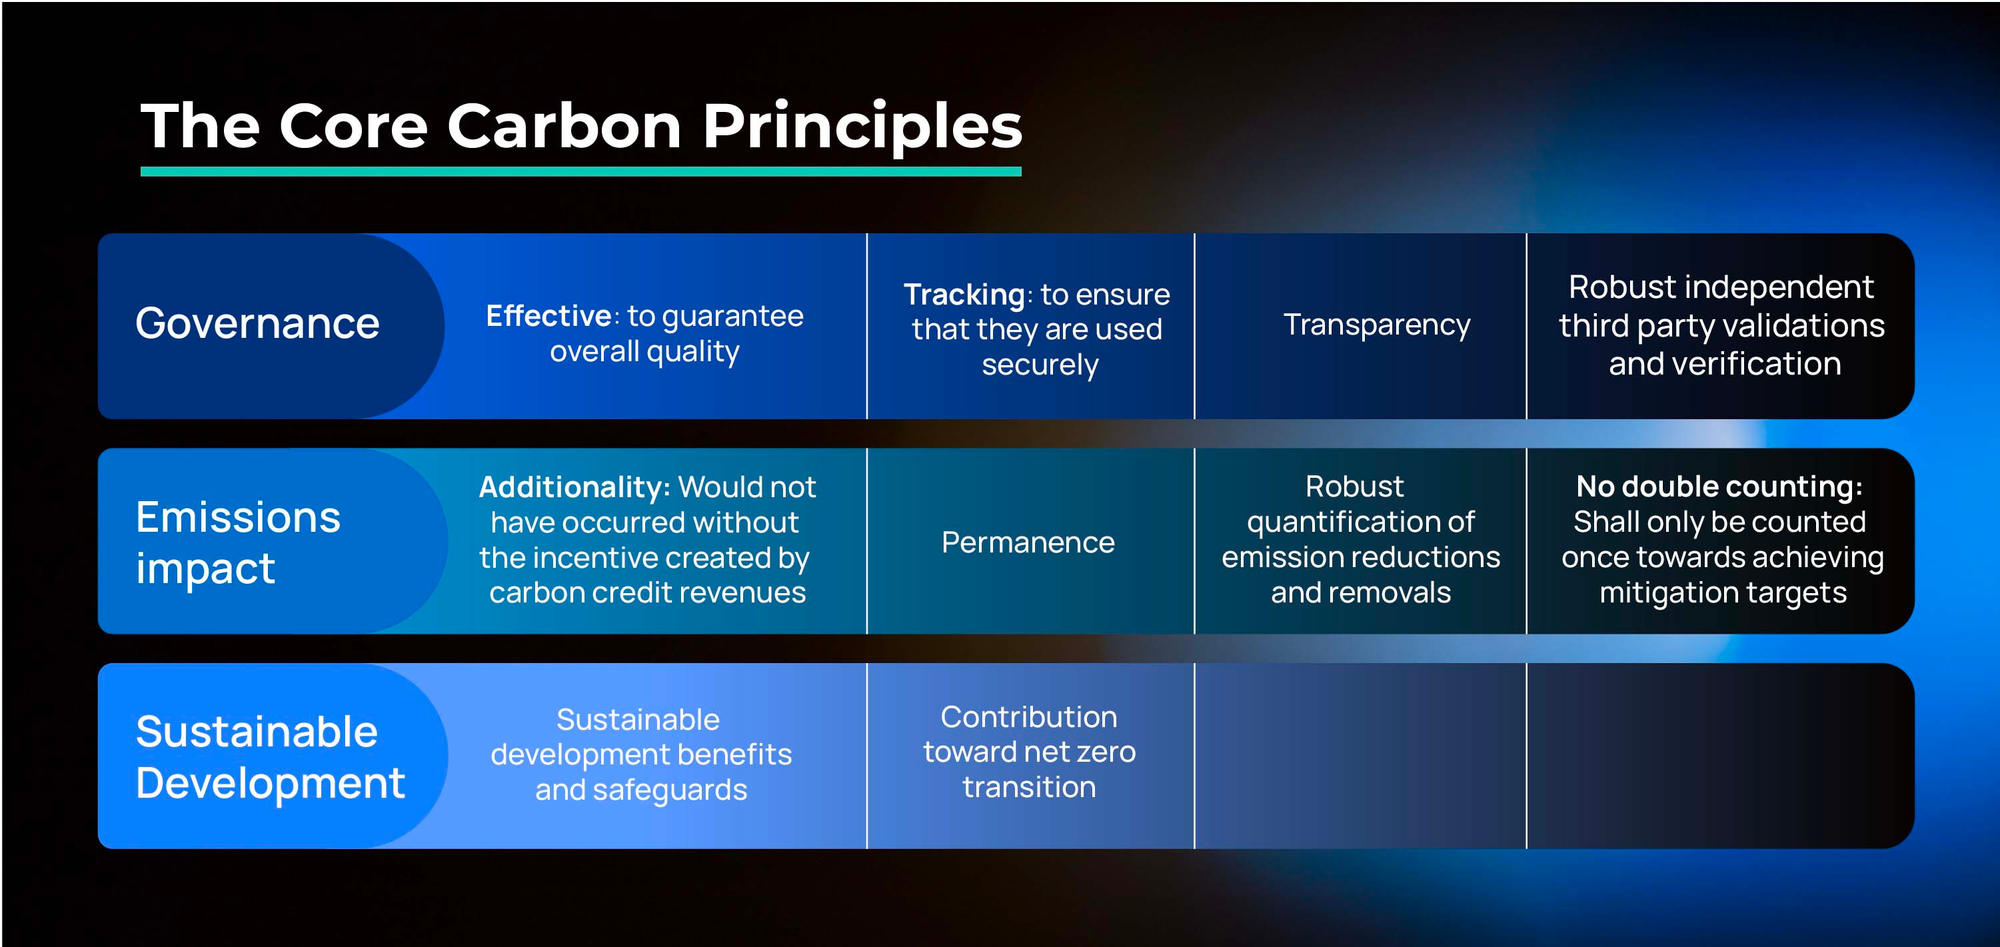 The Core Carbon Principles: Leading the Way for a Sustainable Future?